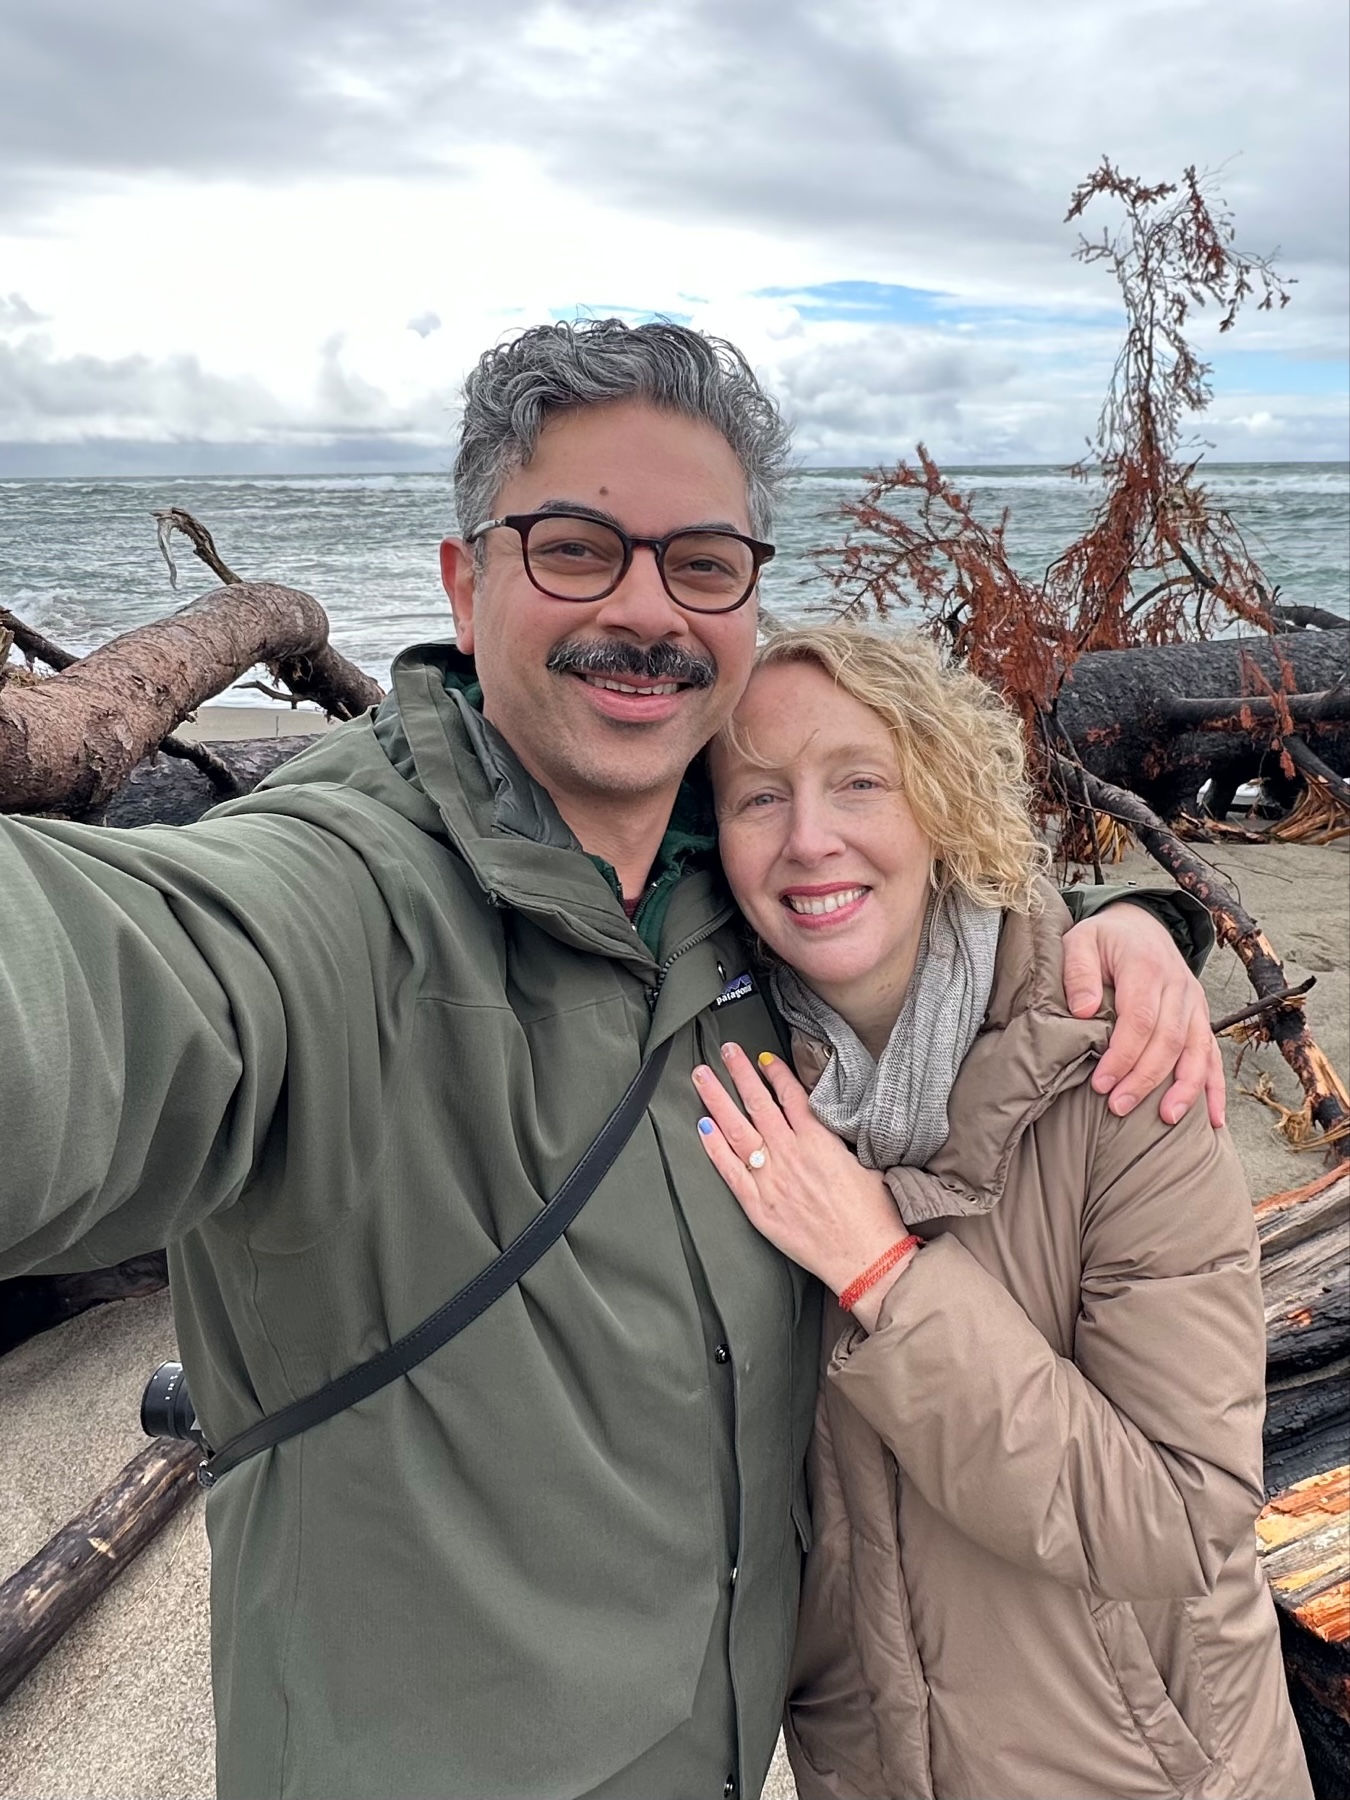 Selfie of me and Jenni with a background of driftwood and the Pacific Ocean. A sparkling ring is visible on her hand.